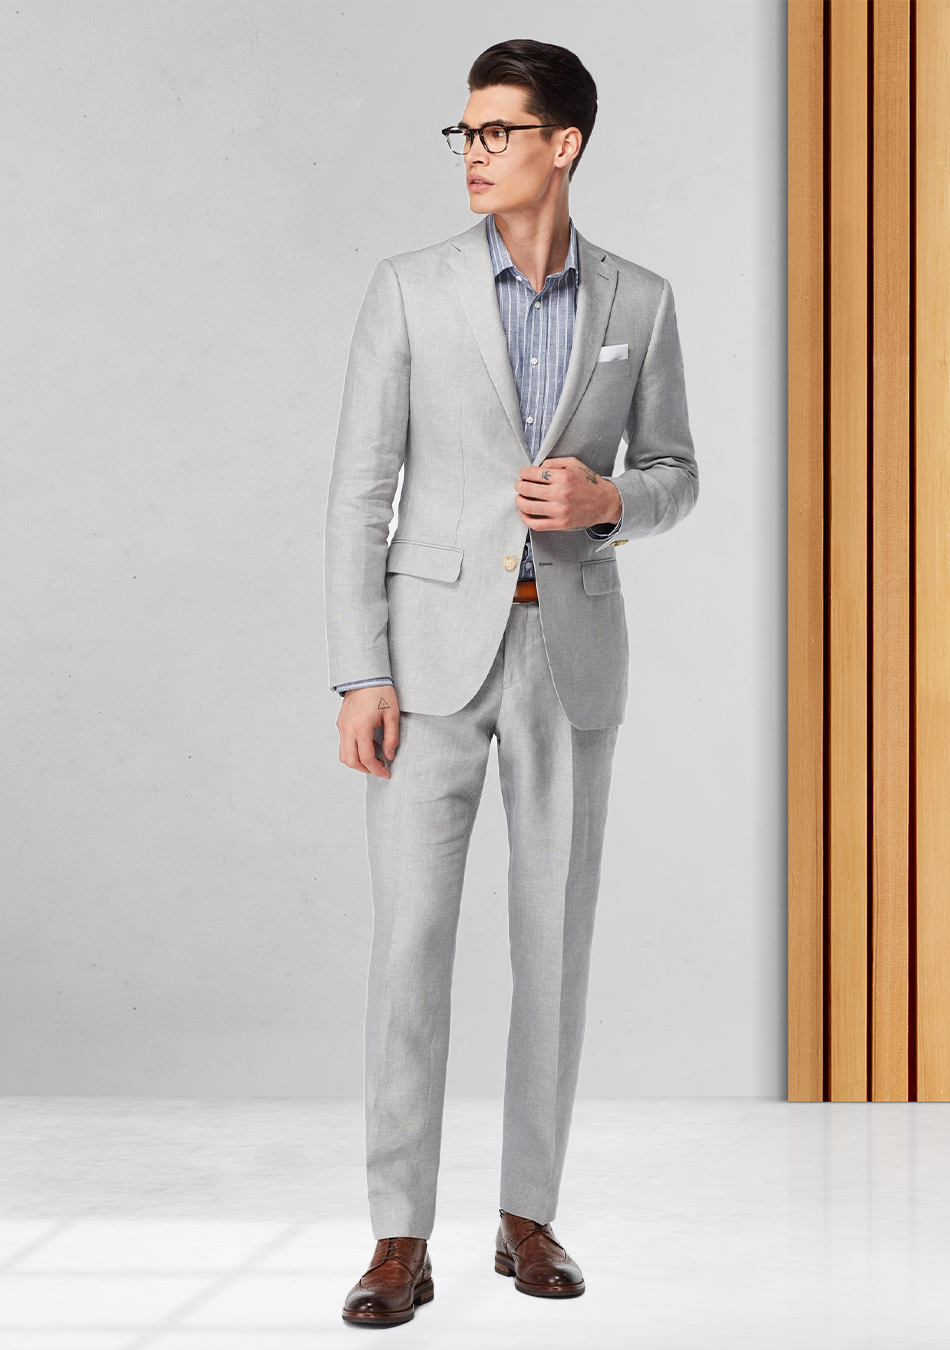 Grey suit, blue patterned shirt, and brown derby brogue shoes